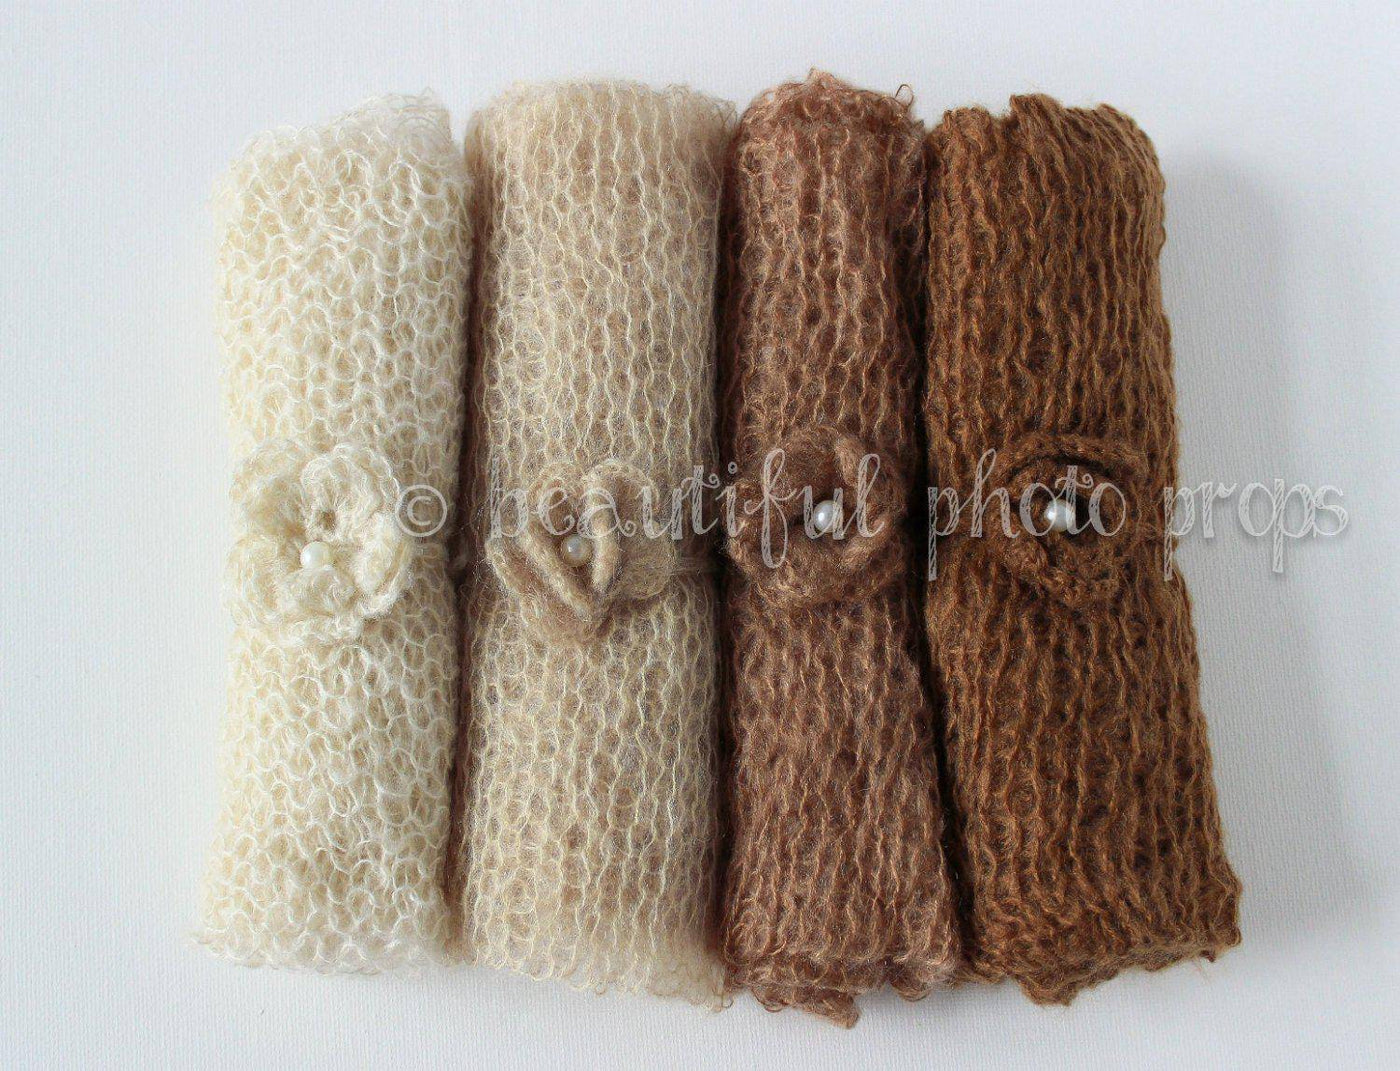 SET Cream Brown Tones Mohair Knit Baby Wrap and Headband - Beautiful Photo Props